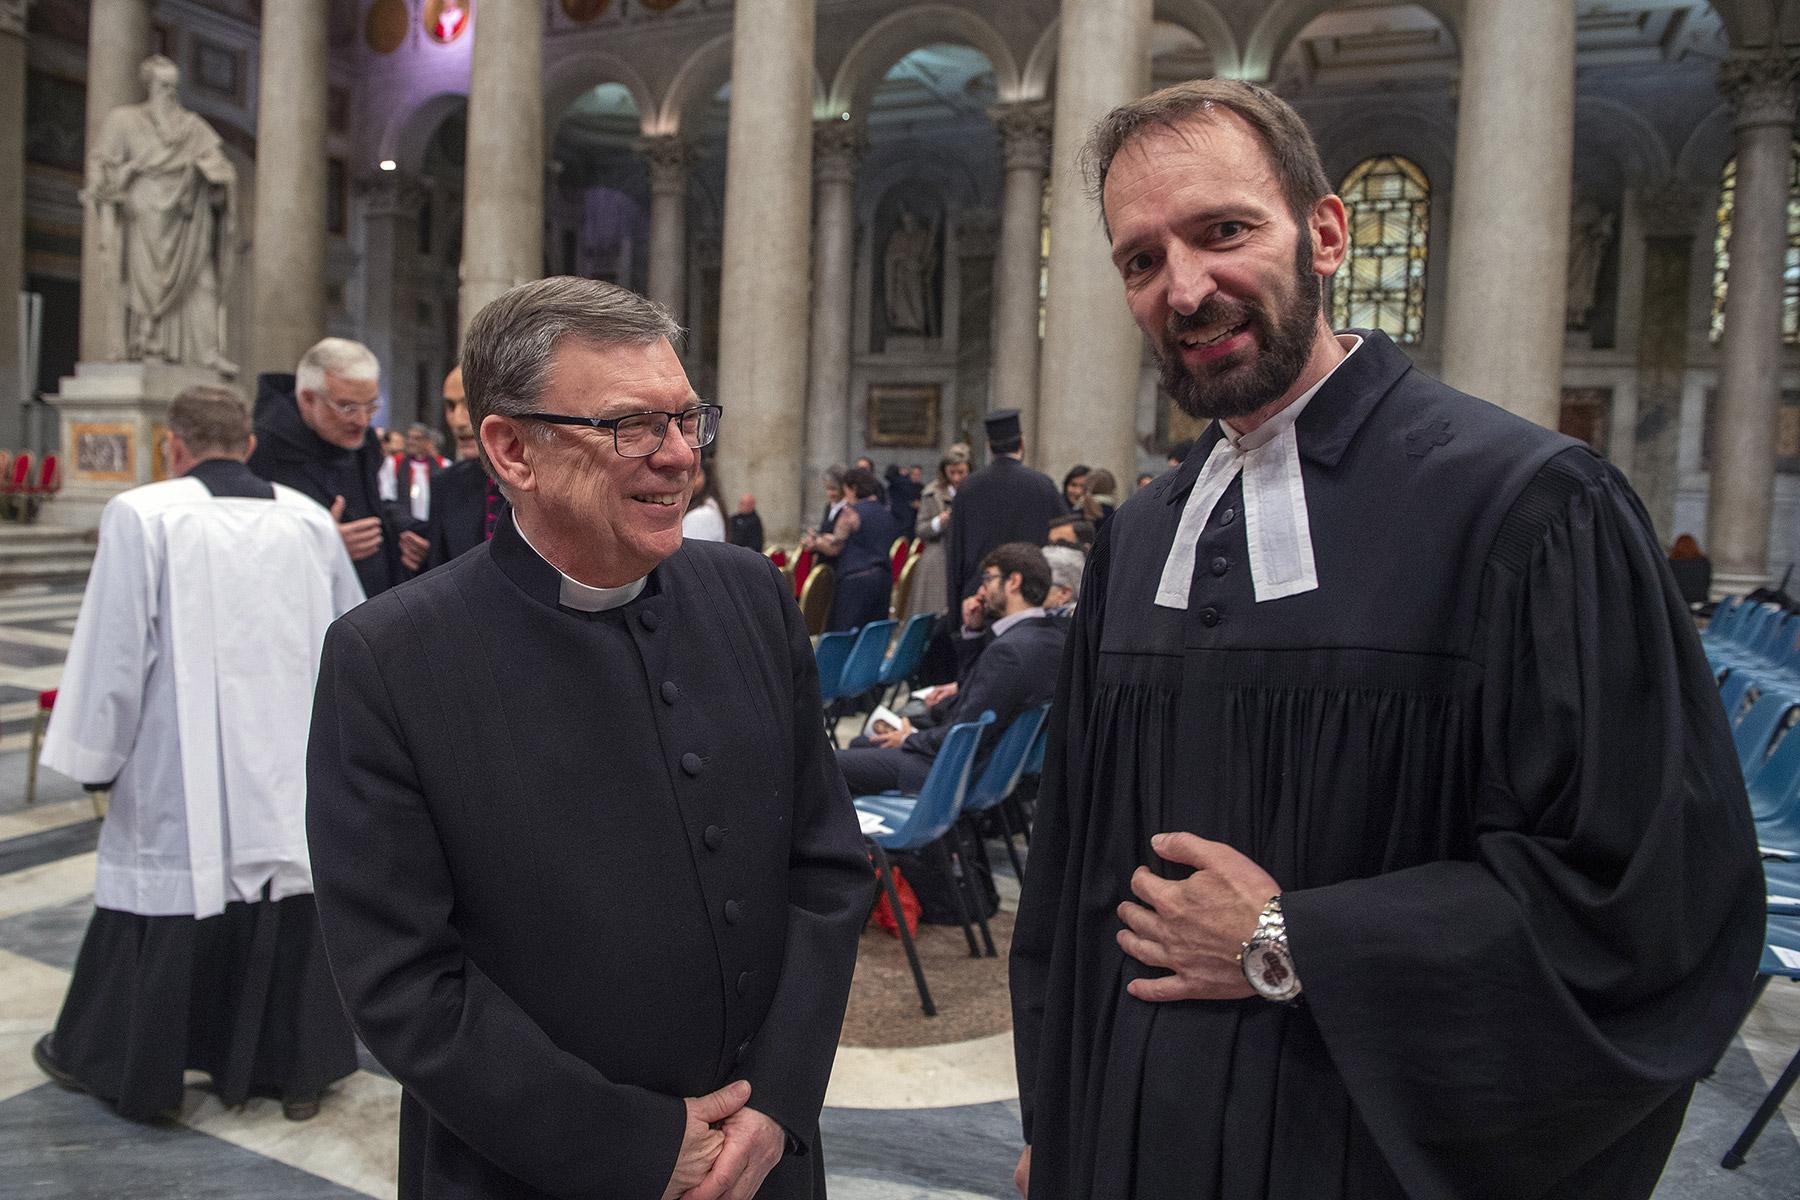 Rev. Michael Jonas, pastor of the Evangelical Lutheran community in Rome, Italy, with Prof. Dirk Lange, LWF Assistant General Secretary for Ecumenical Relations. Photo: CatholicPressPhoto/A. Giuliani